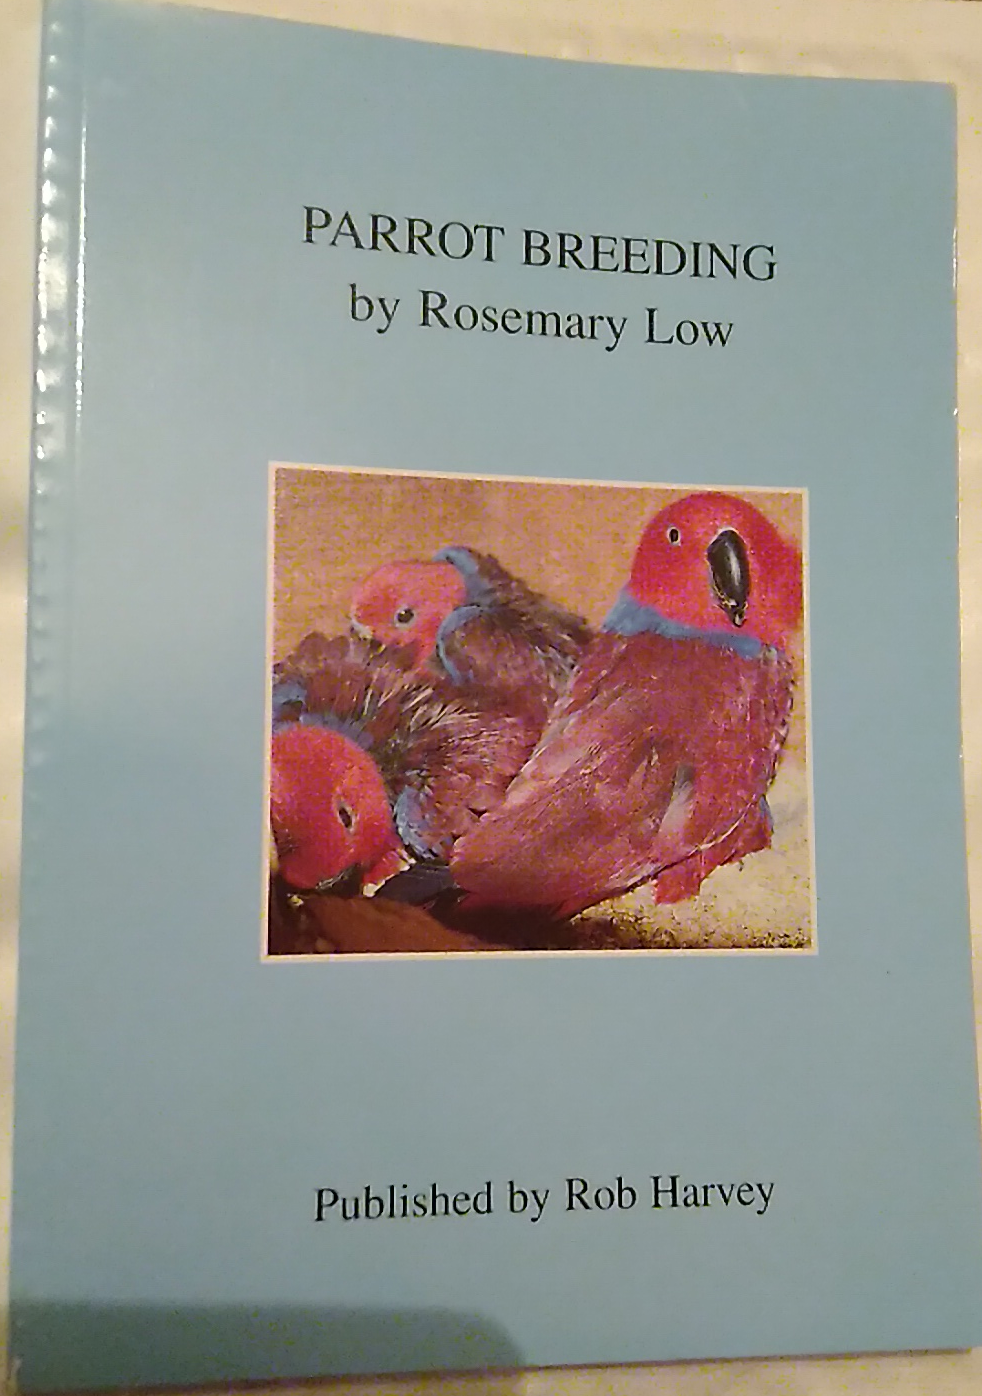 Parrot Breeding by Rosemary Low